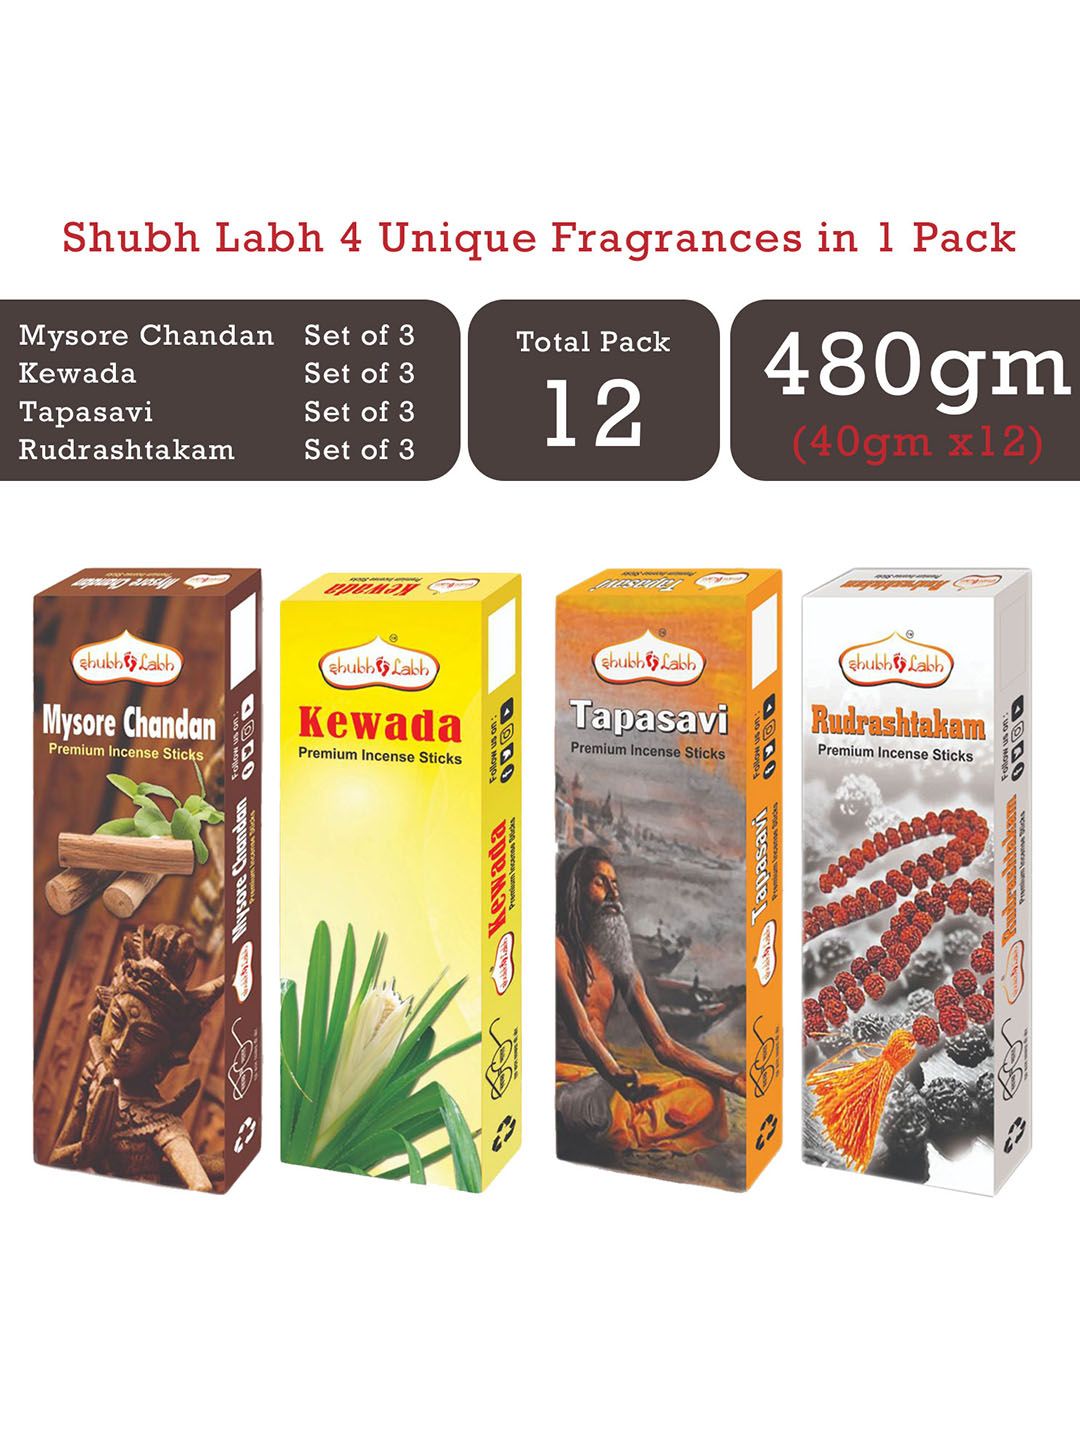 Shubh Labh Set Of 12 Black Incense Stick Price in India